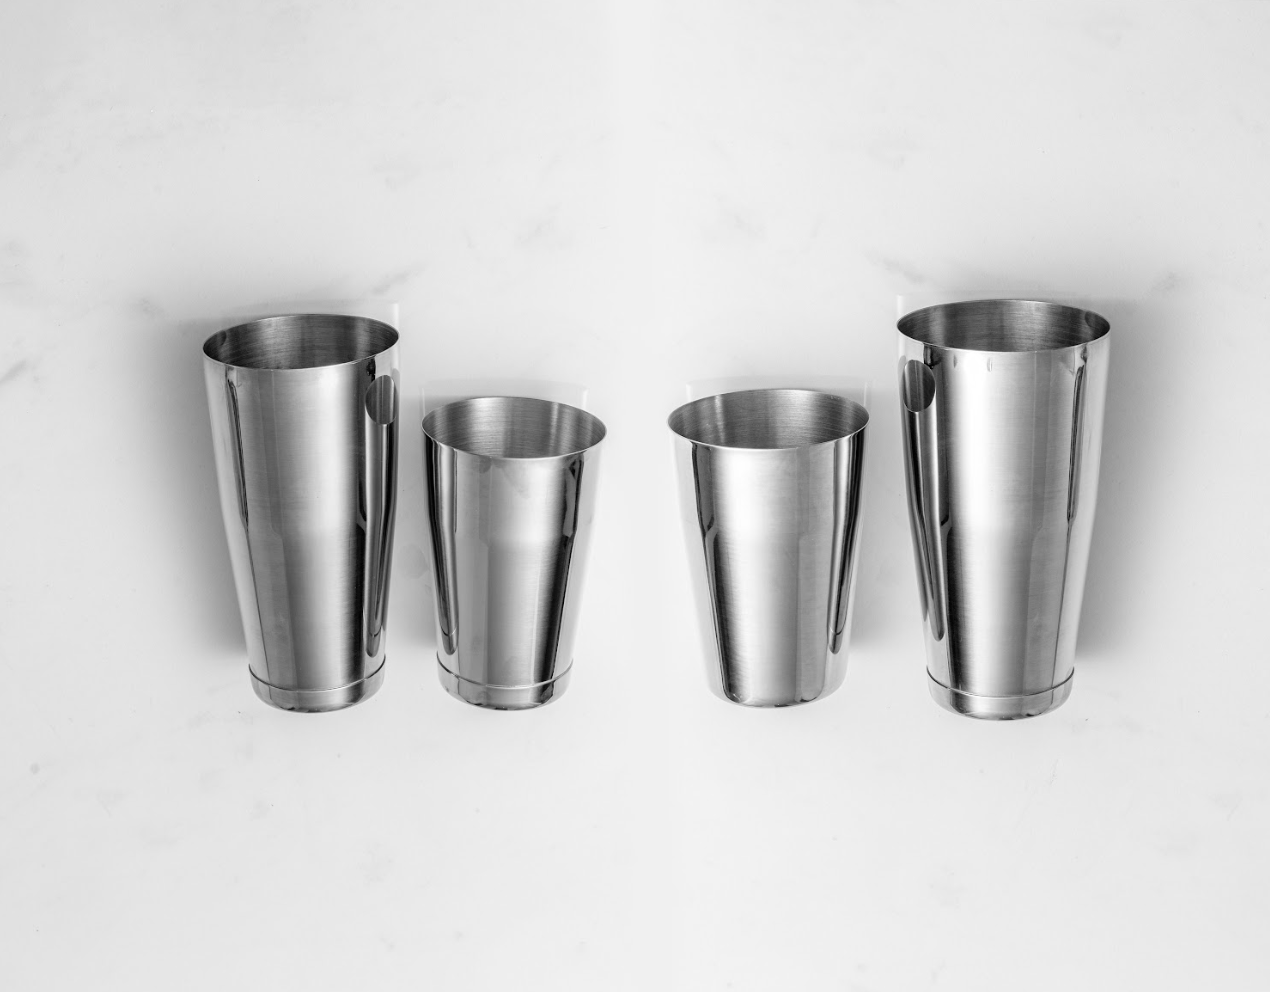 BARIANTTE Weighted Boston Cocktail Shakers, Bartender Shaker Large, Bo —  CHIMIYA